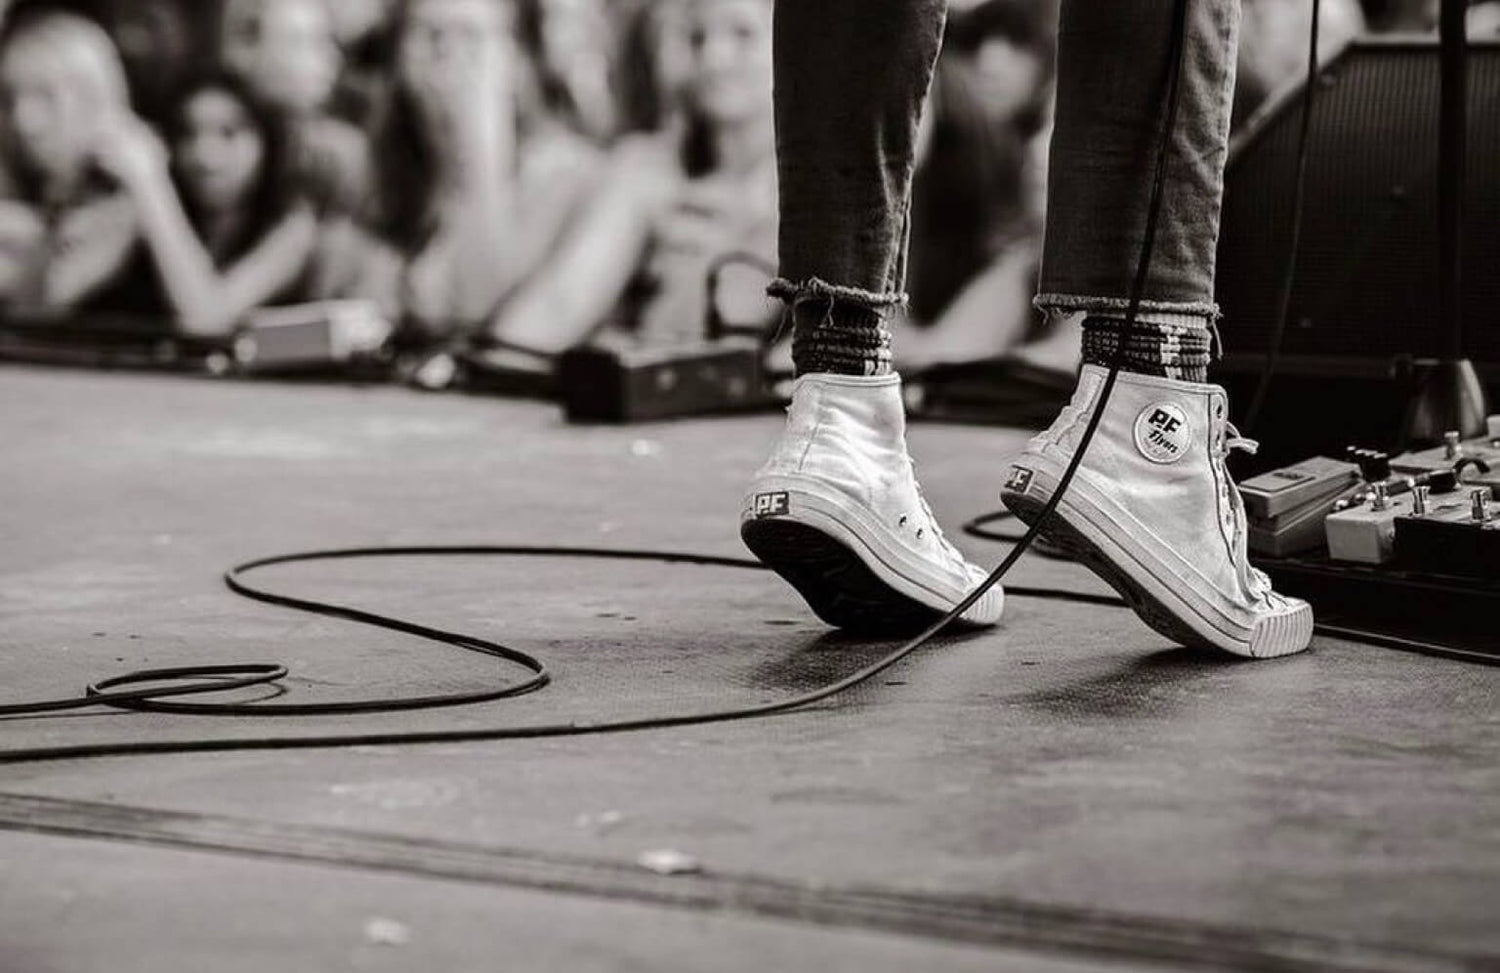 Guitarist wearing PF Flyers on stage at a concert